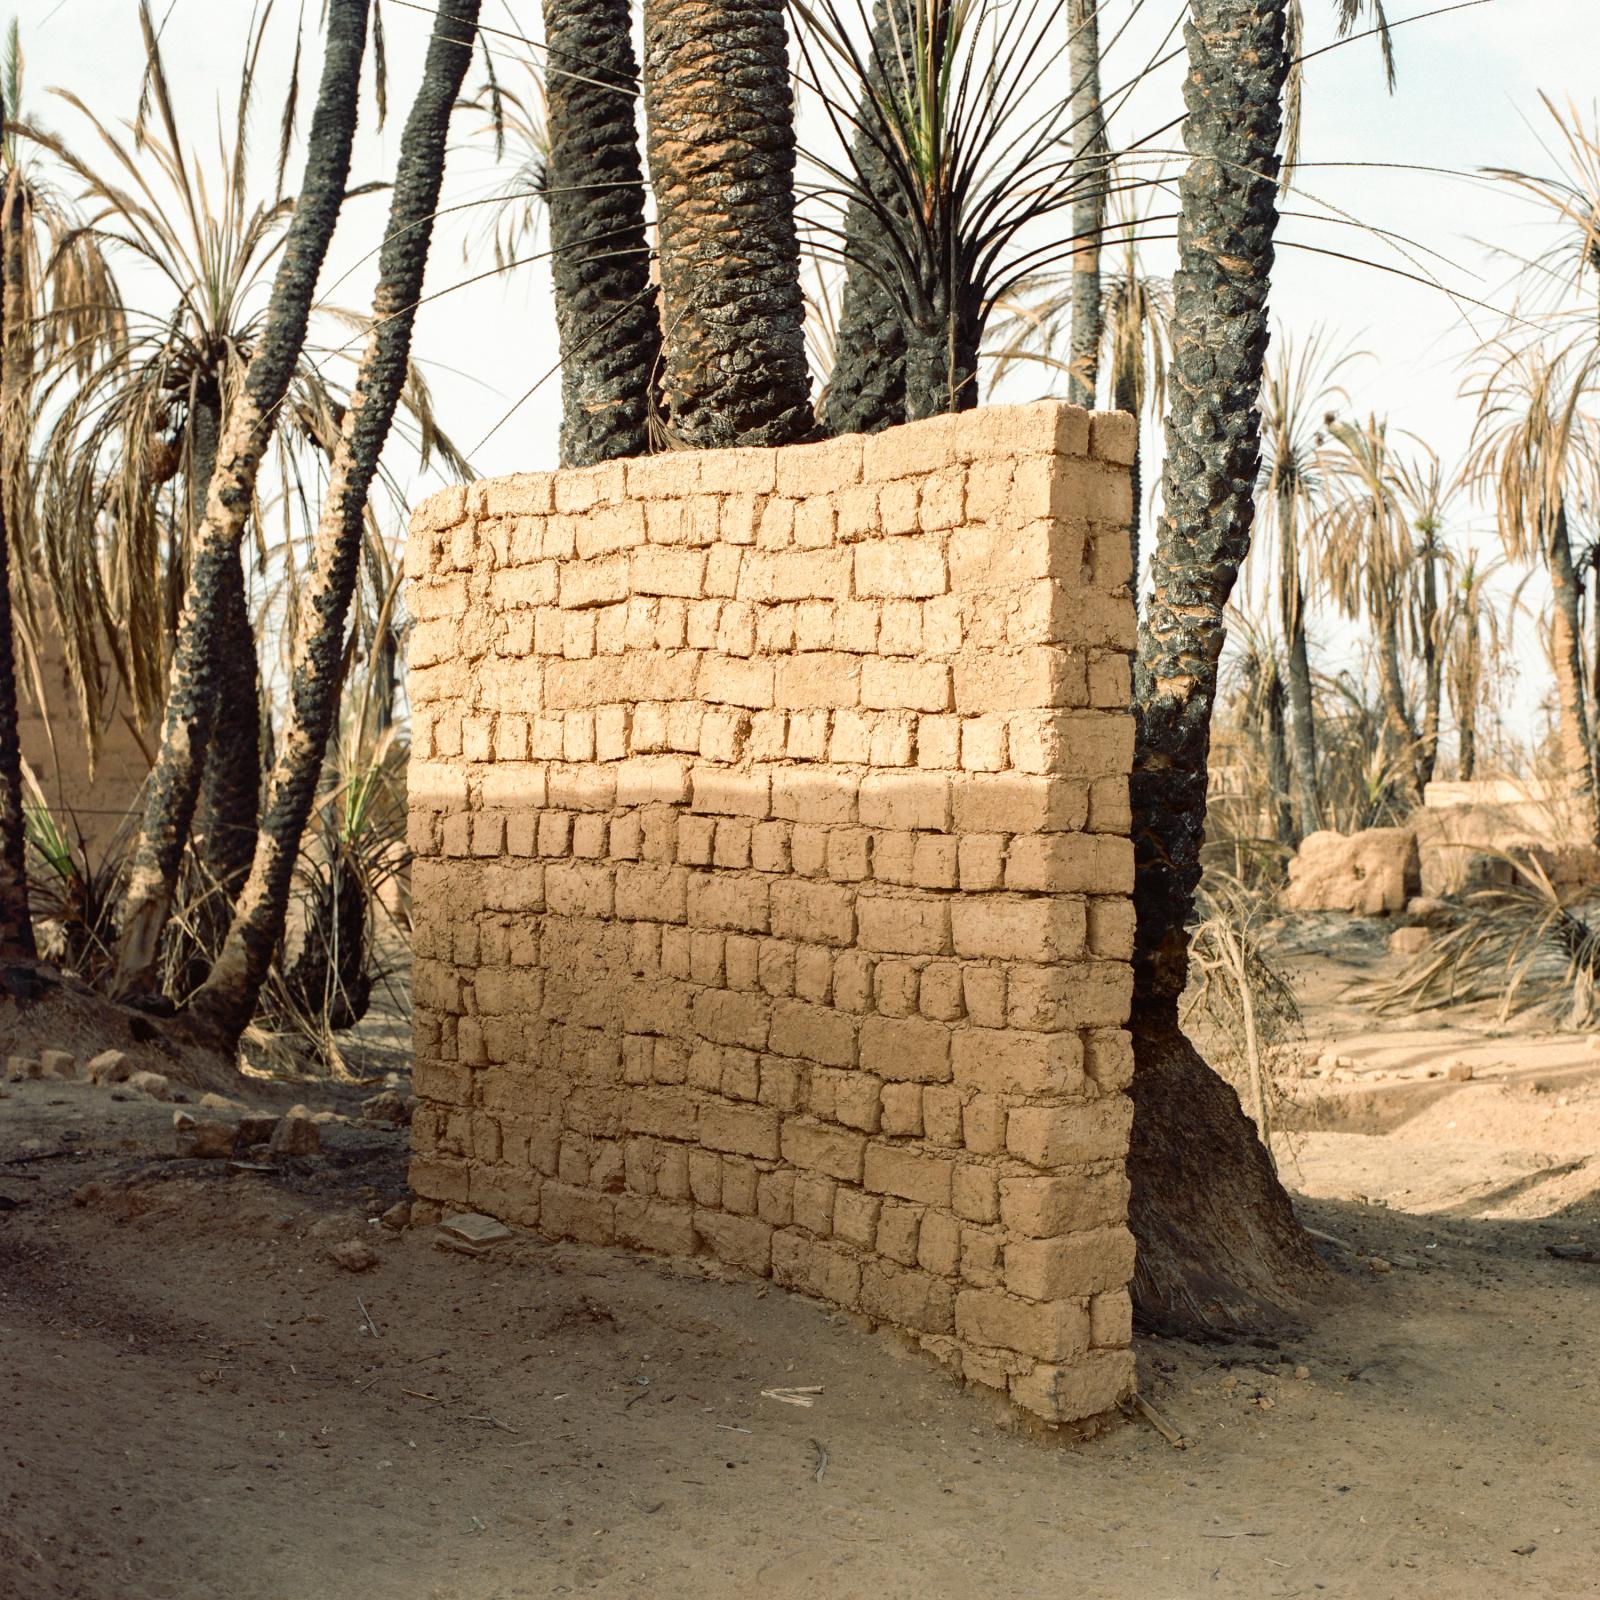 Before it's gone - ongoing - Oasis of Tighmert, Morocco, in August 2020. The pisé...